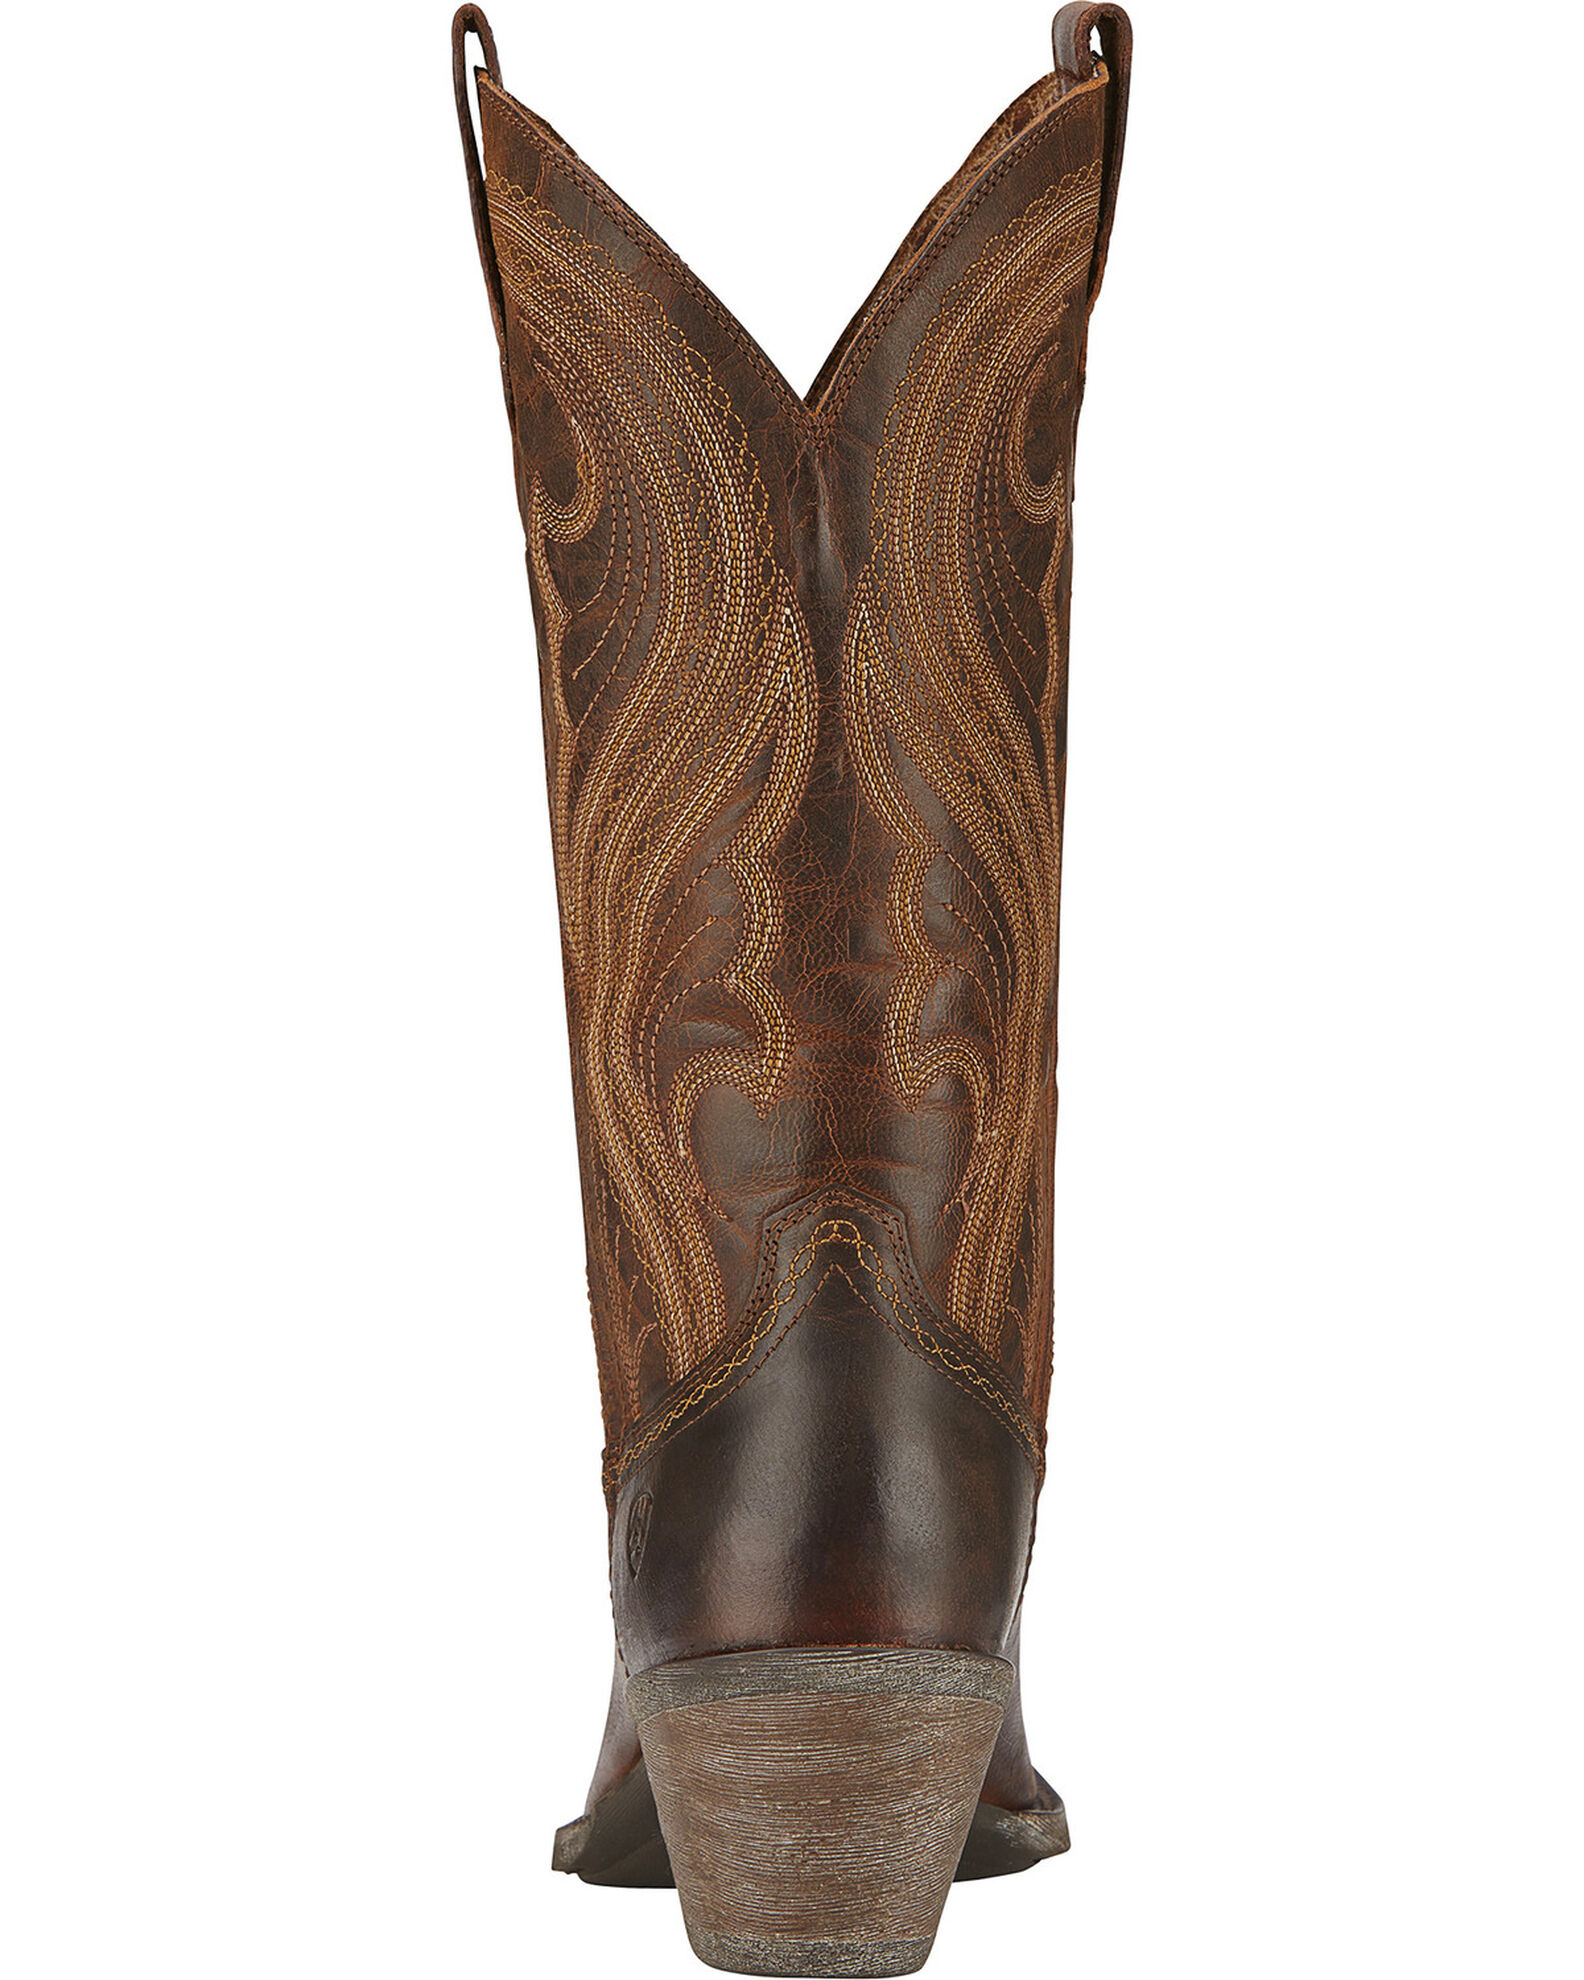 Product Name: Ariat Lively Cowgirl Boots - Square Toe